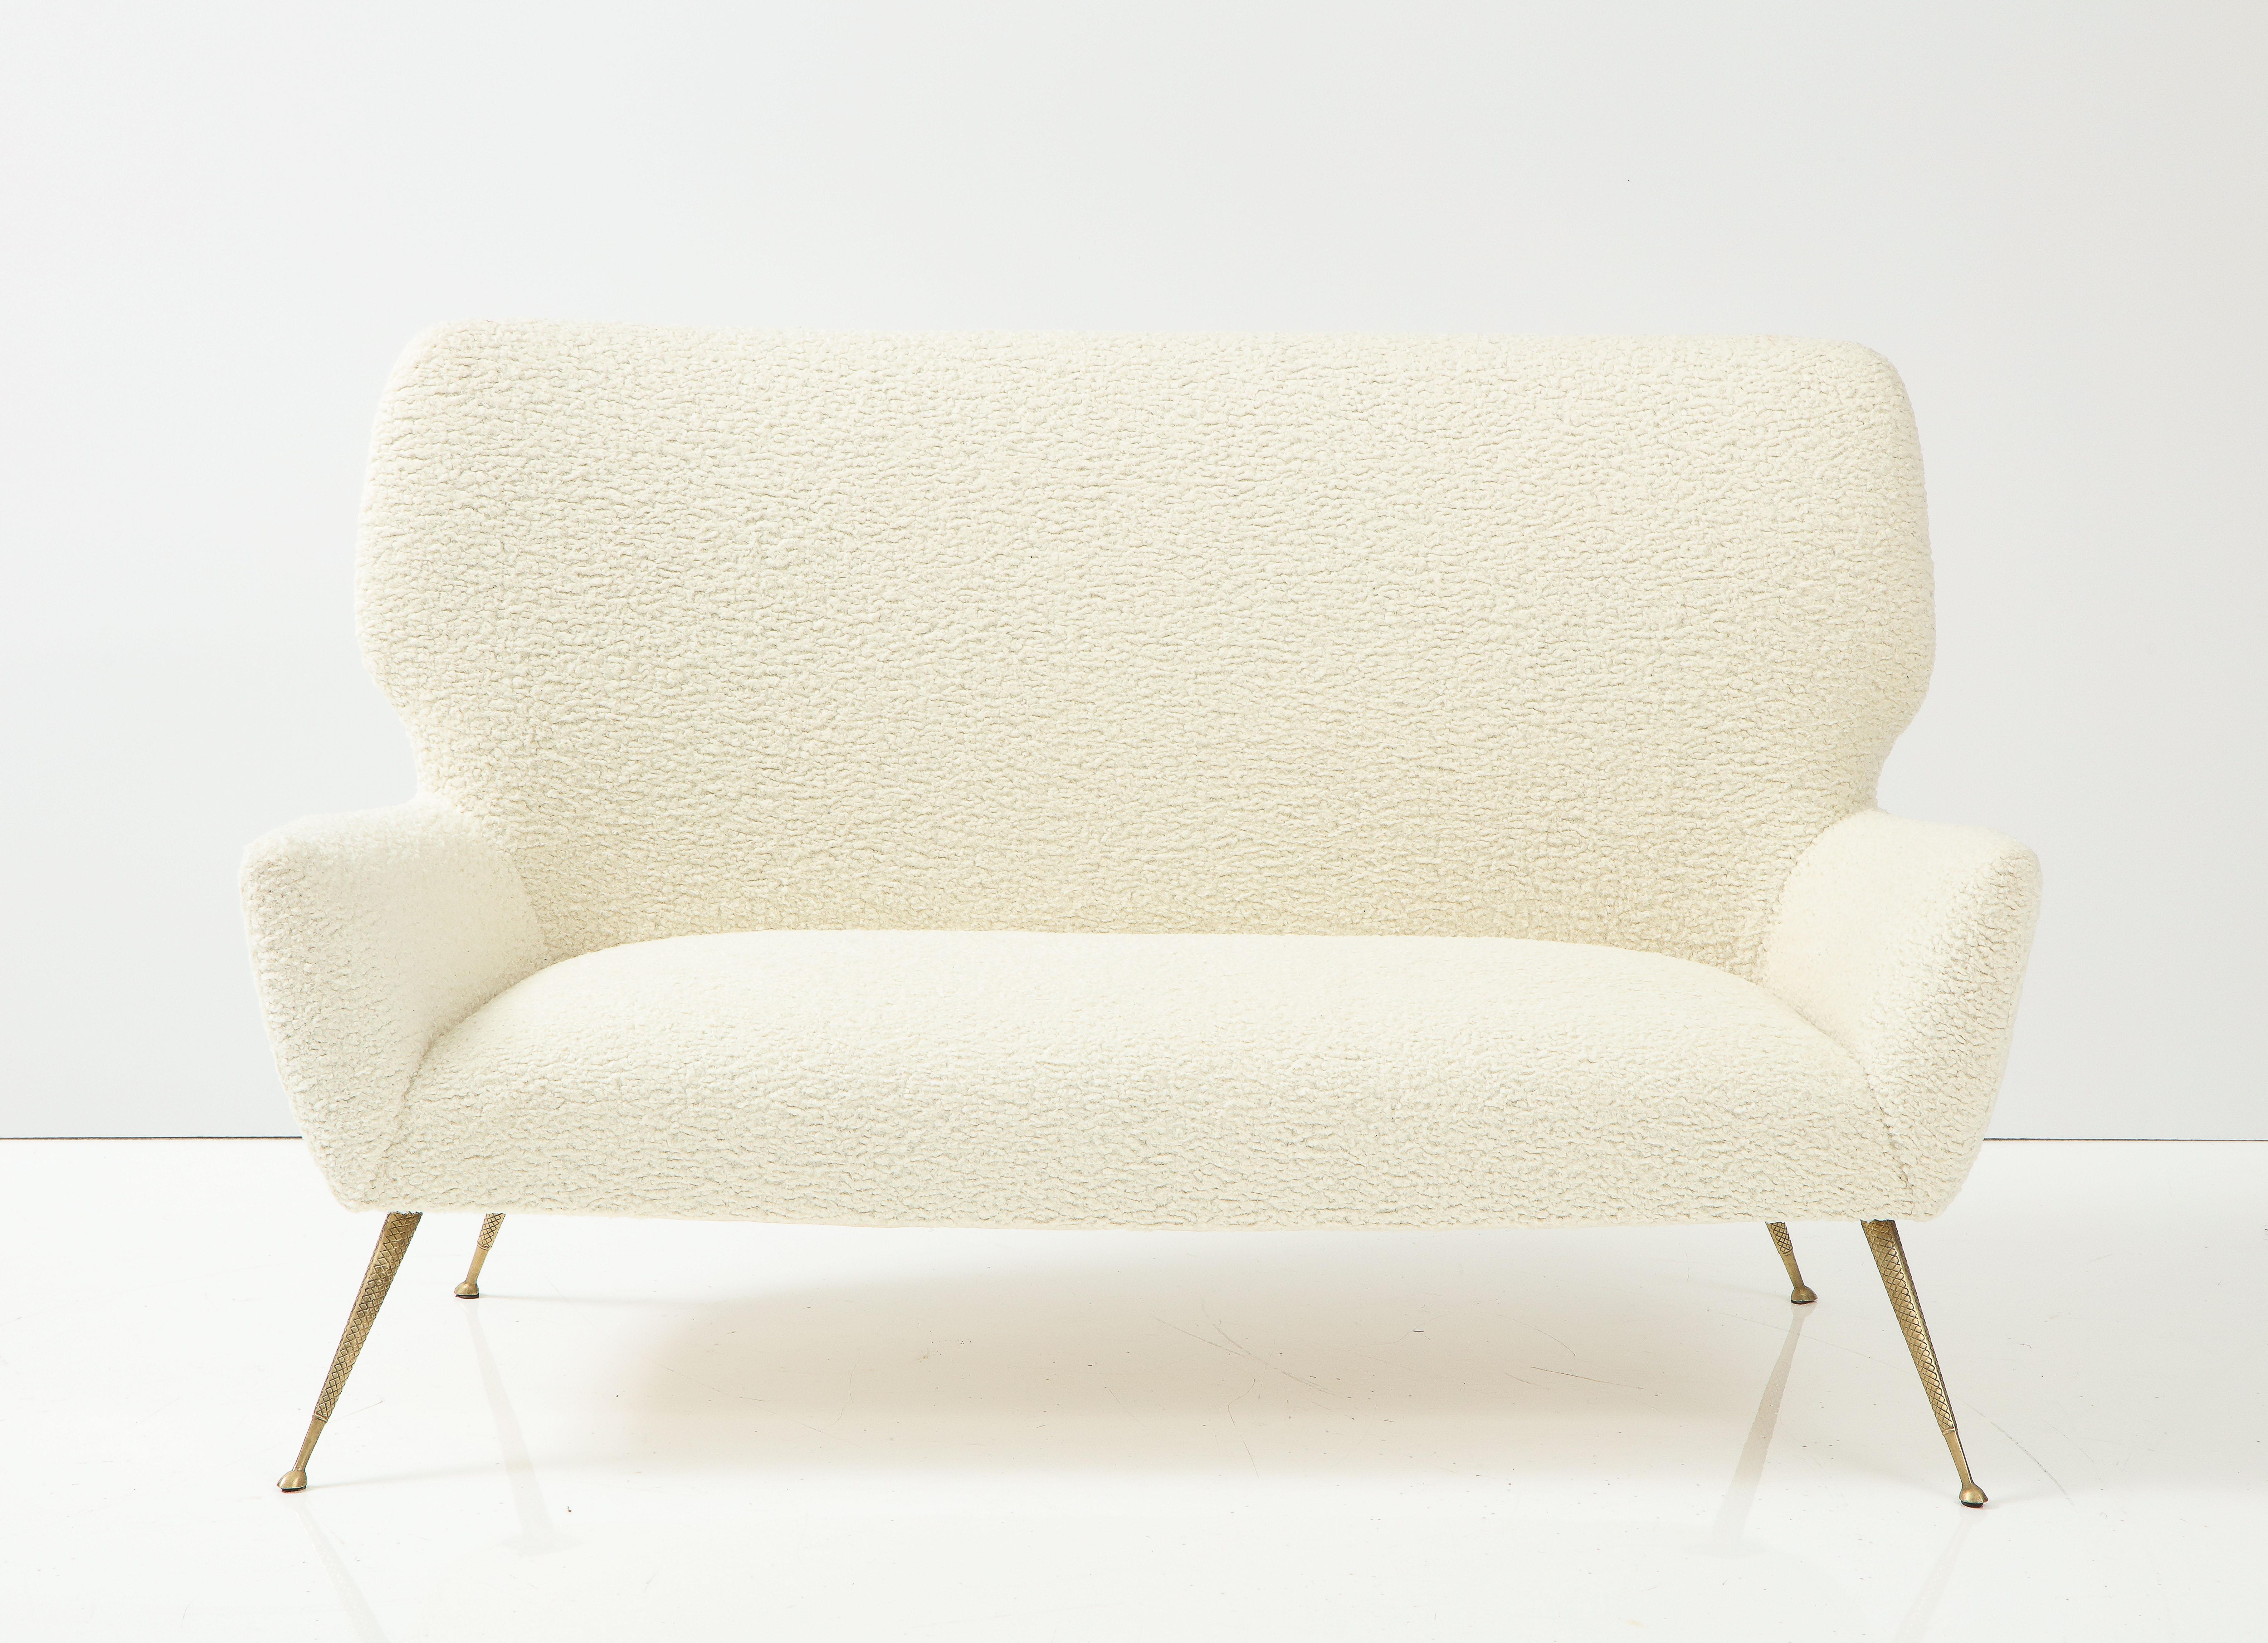 Italian Settee with brass legs, Attributed to Gio Ponti for Casa e Giardino.
A rare and unique settee with curved, elegantly shaped back and arms supported on splayed and tapered cast brass legs with a cross hatch design. Extremely elegant with the